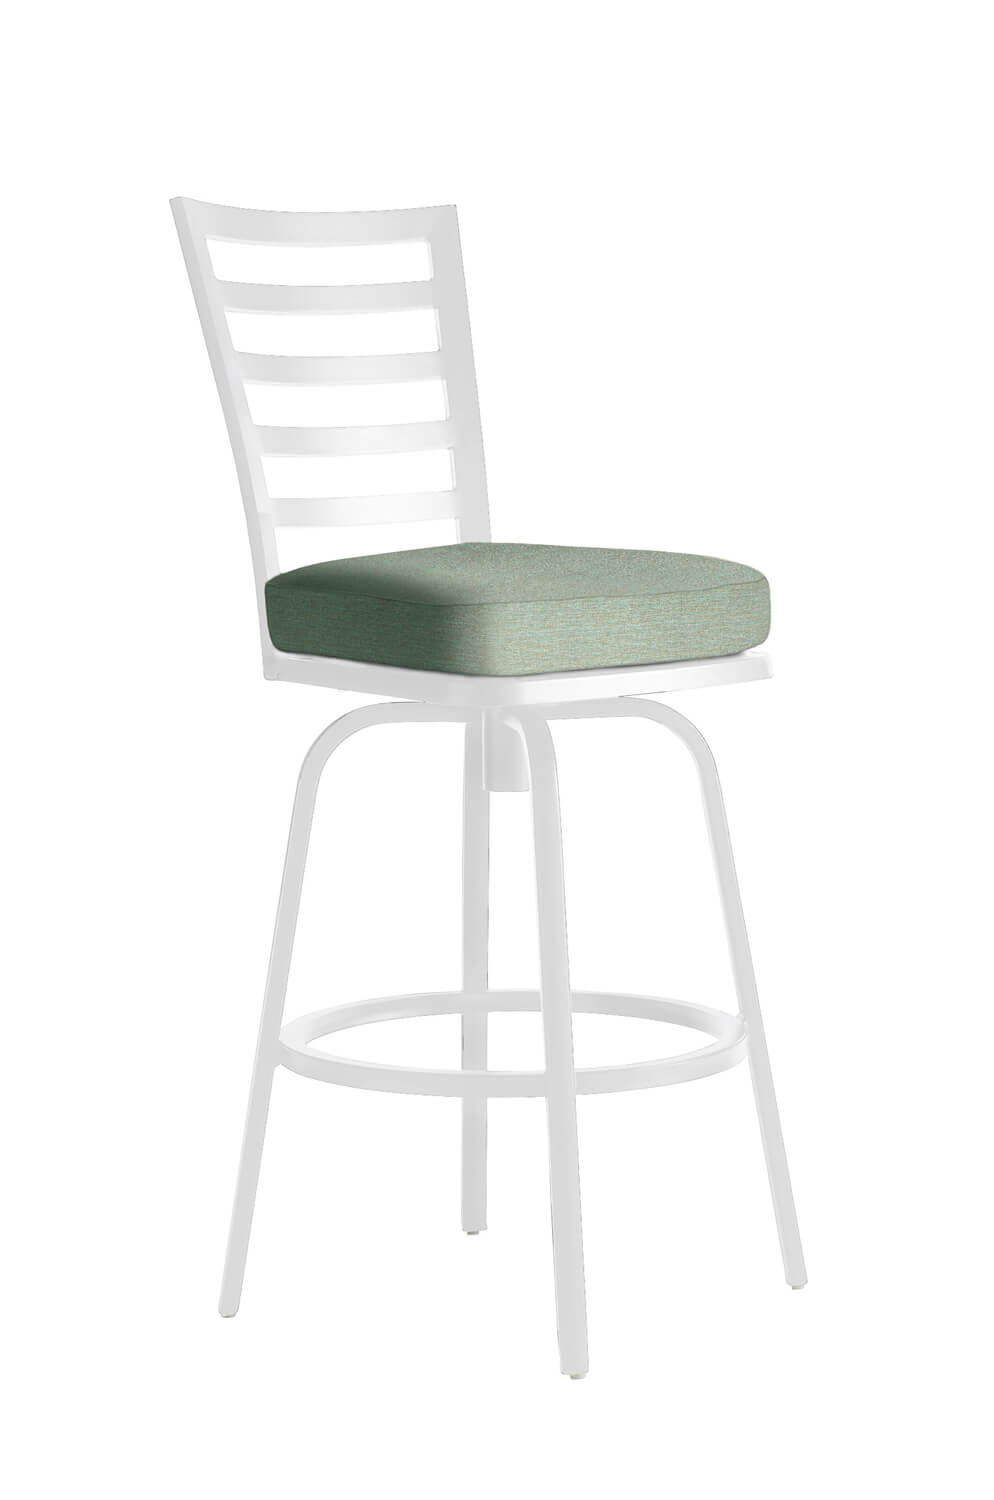 Mallin's M-Series White Outdoor Swivel Bar Stool with Green Seat Cushion